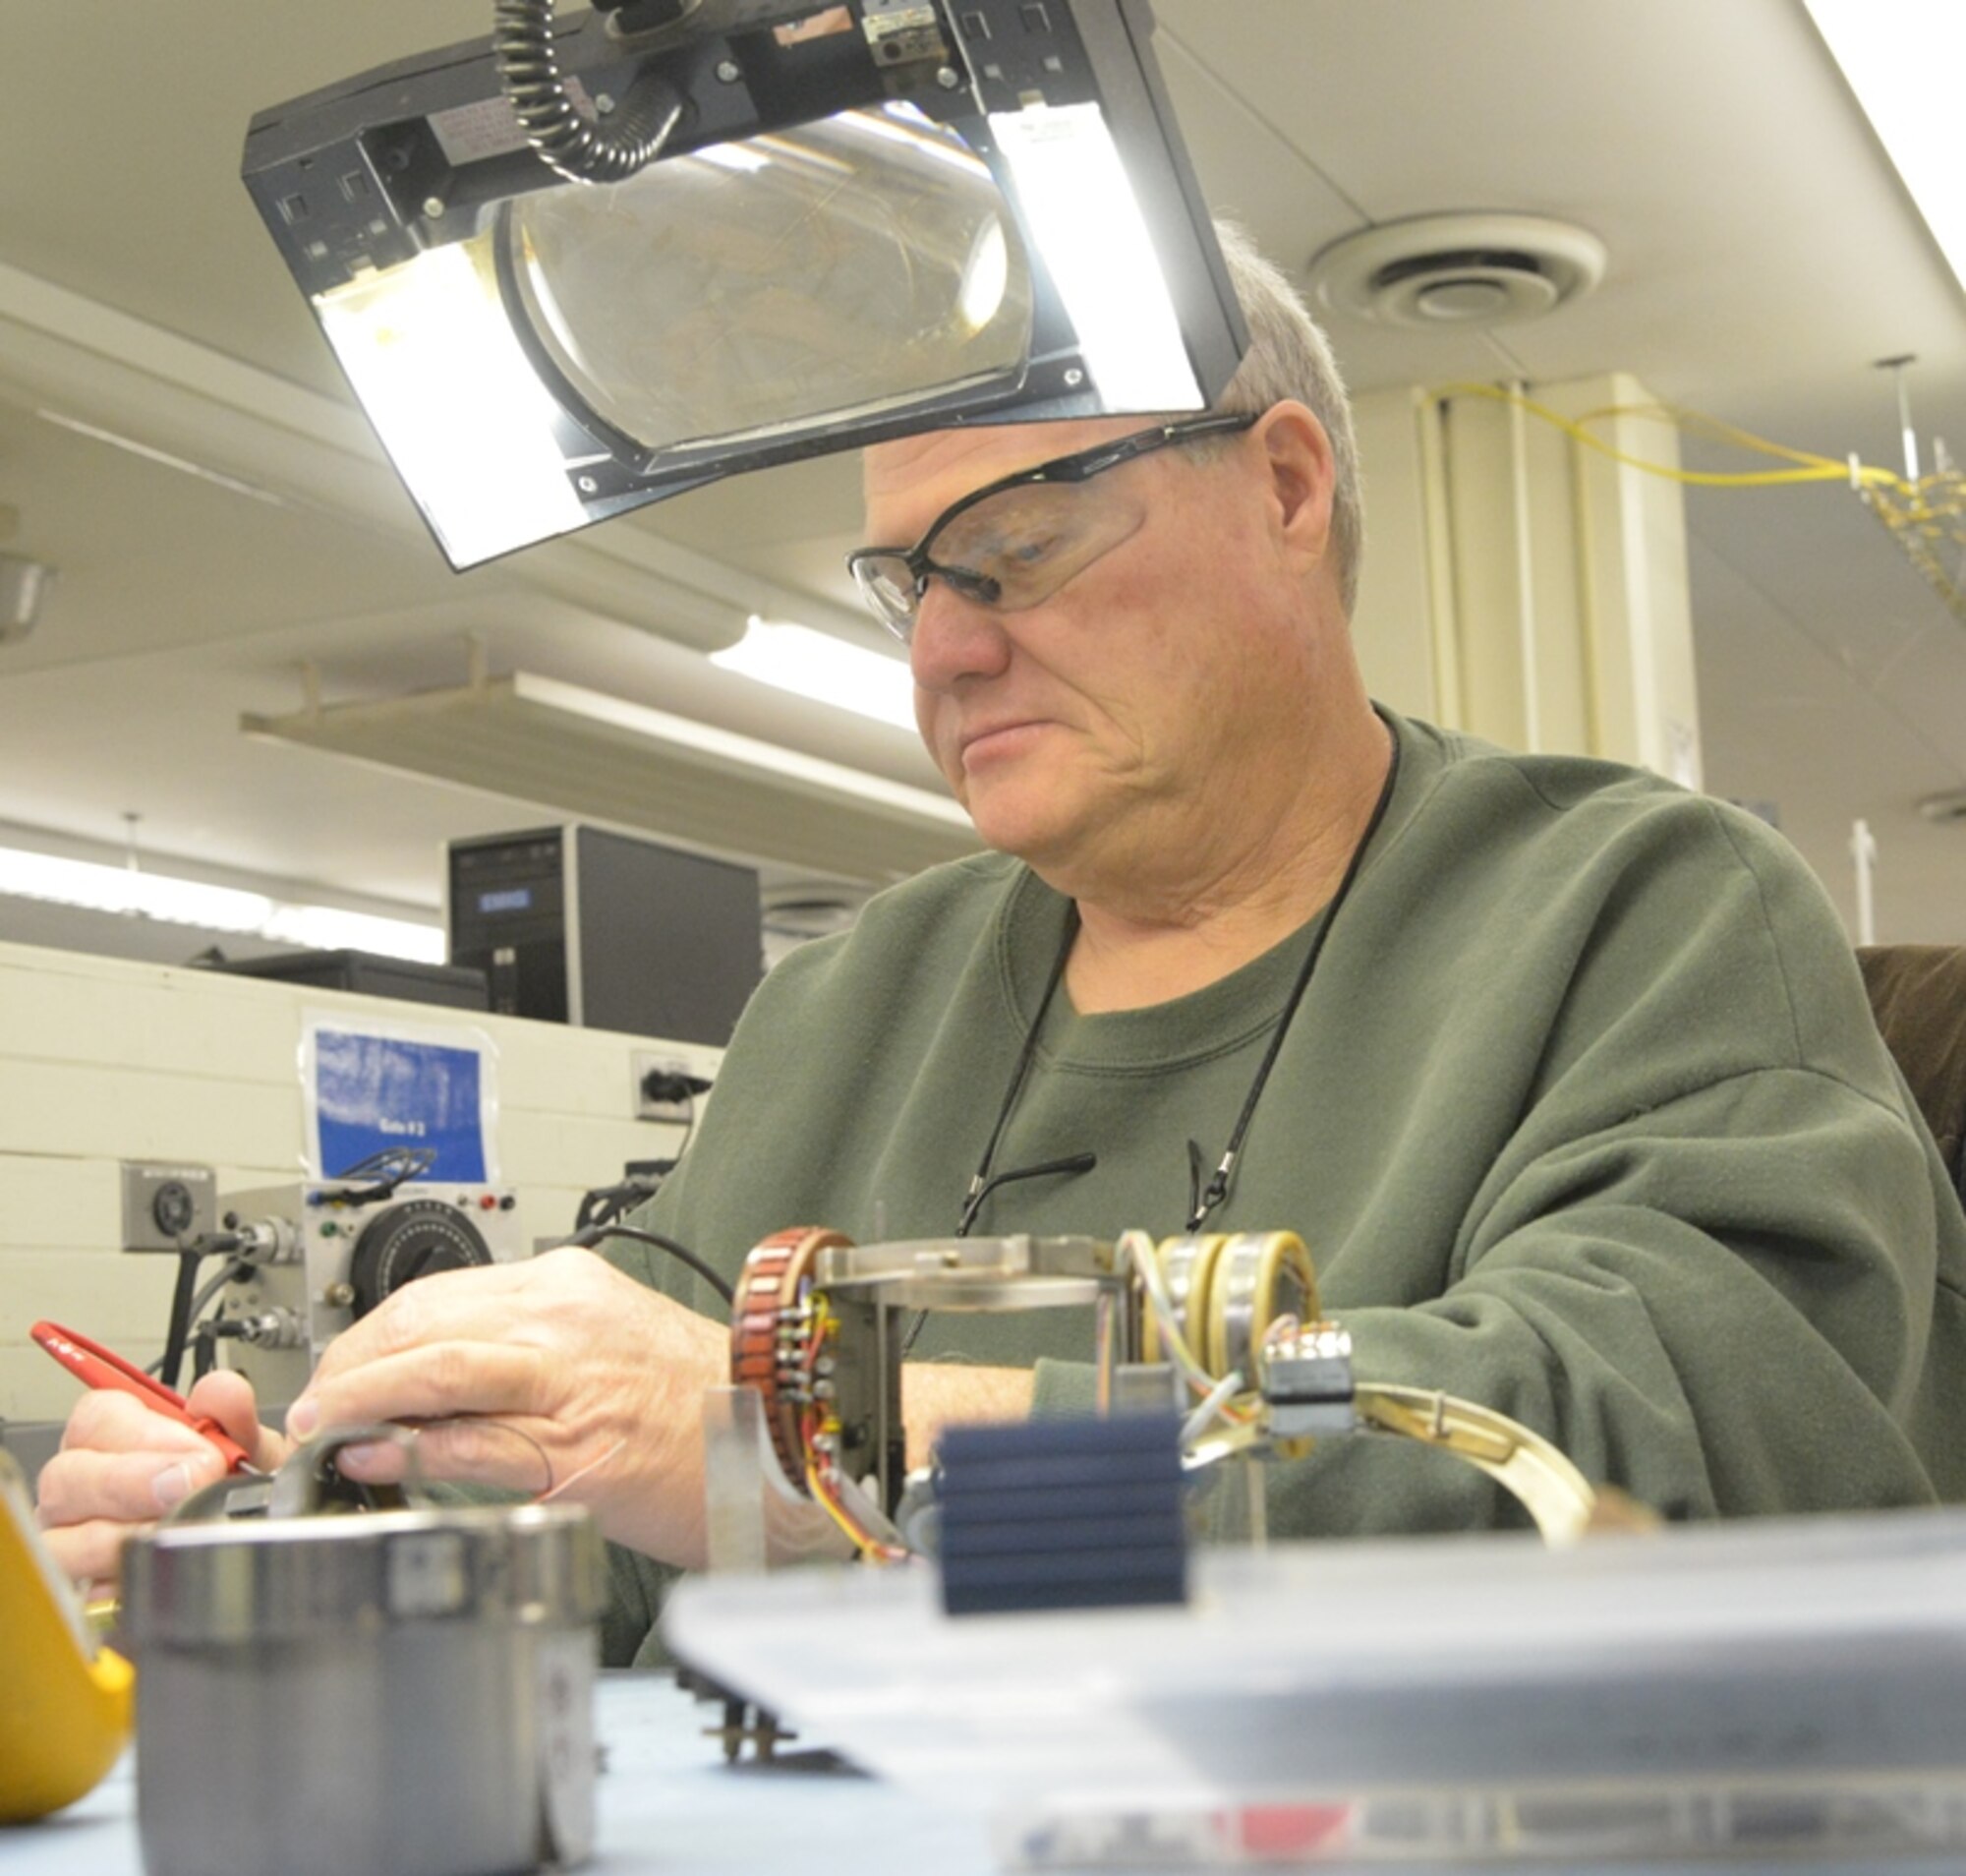 Michael Quinn, 566th Electronics Maintenance Squadron mechanic, repairs a C-12 directional gyroscope for the C-130. The squadron is responsible for many of the Air Force’s aviation electronics repairs on the C-130, C-17, F-15, A-10 and other weapons systems. (U.S. Air Force photo by Ray Crayton)